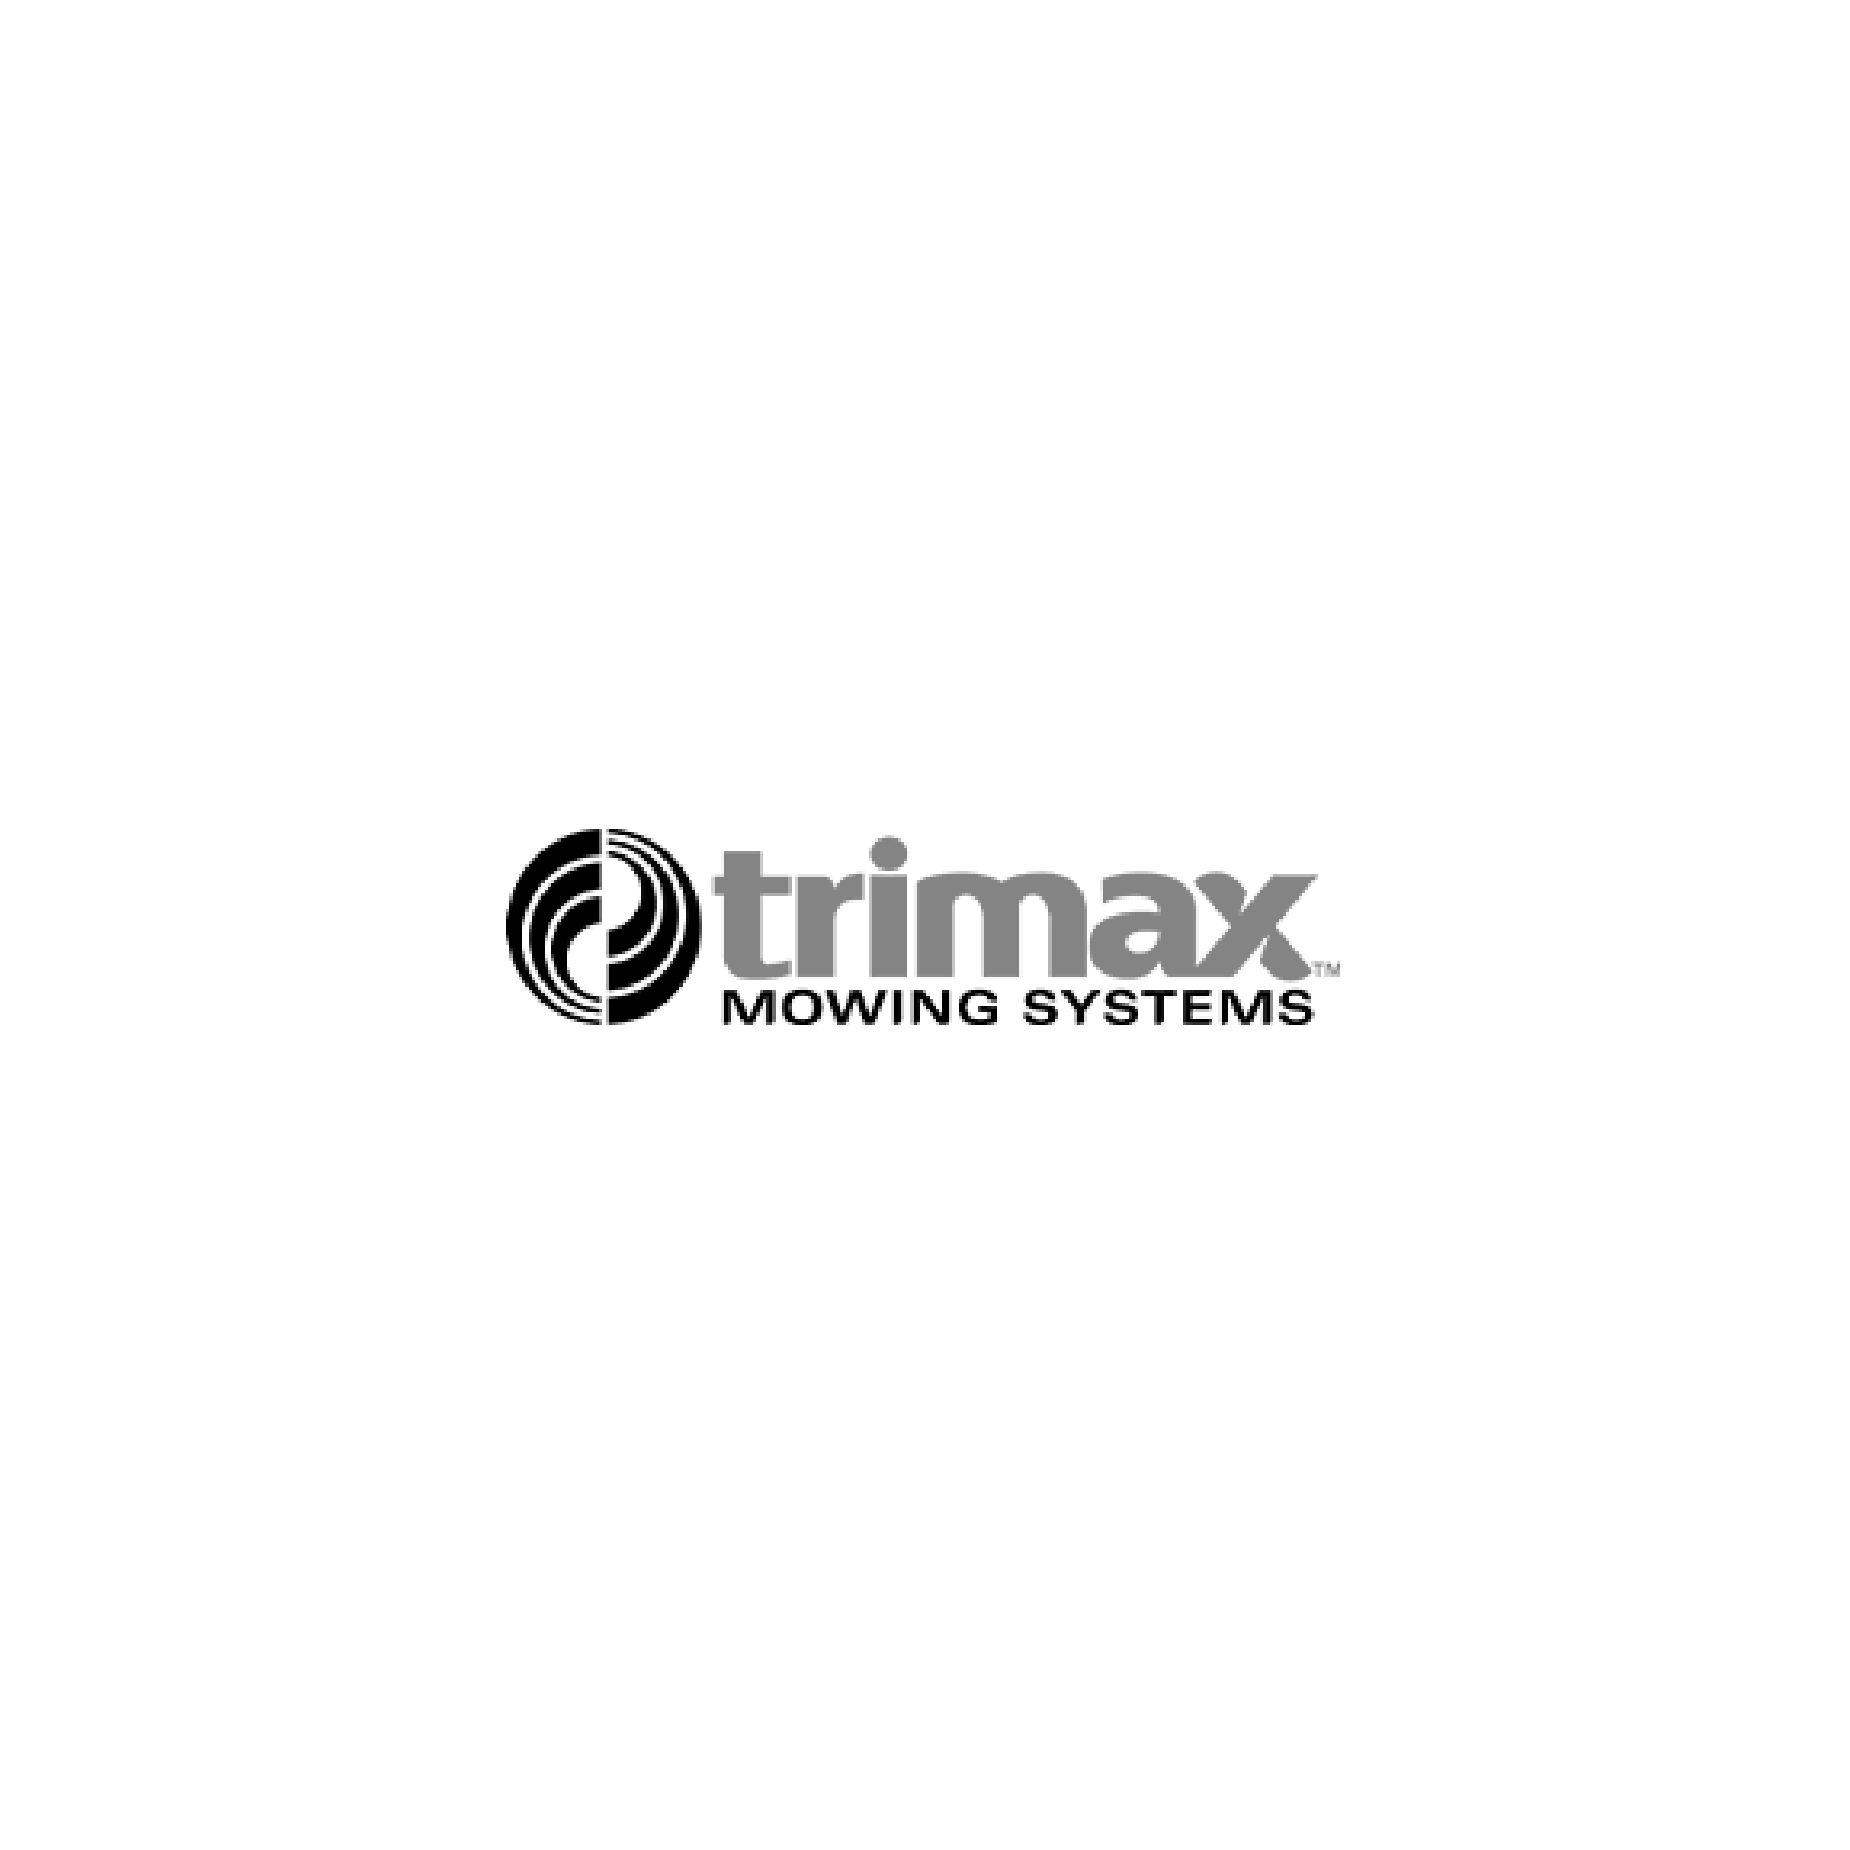 trimax-01.png